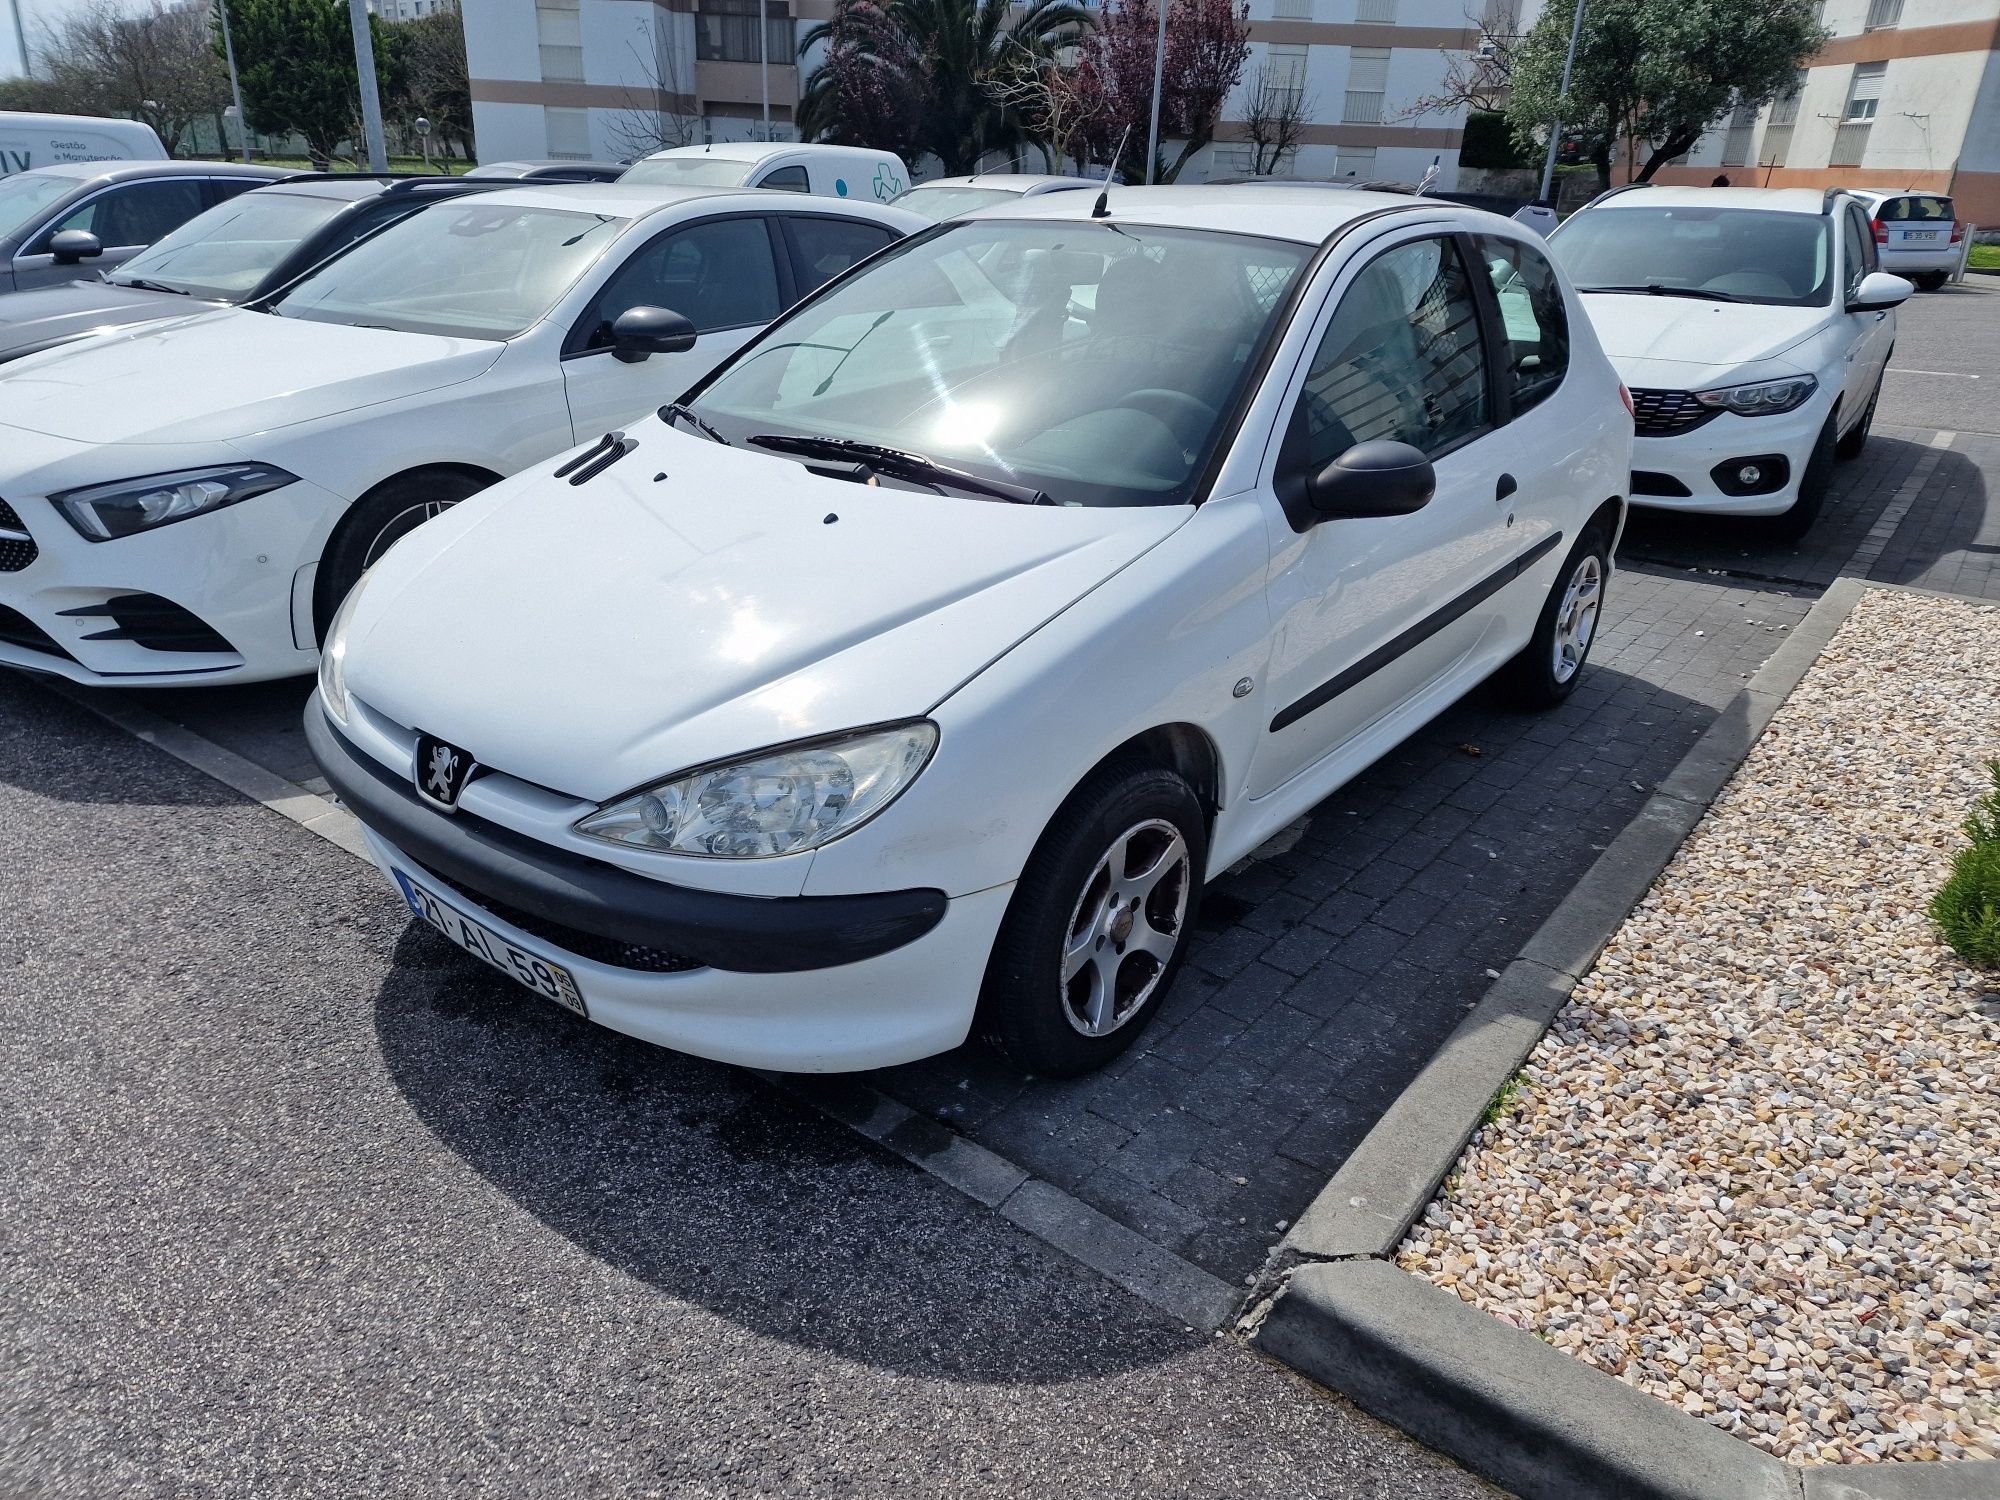 Peugeot 206 1.4 Hdi (comercial 2 lugares))